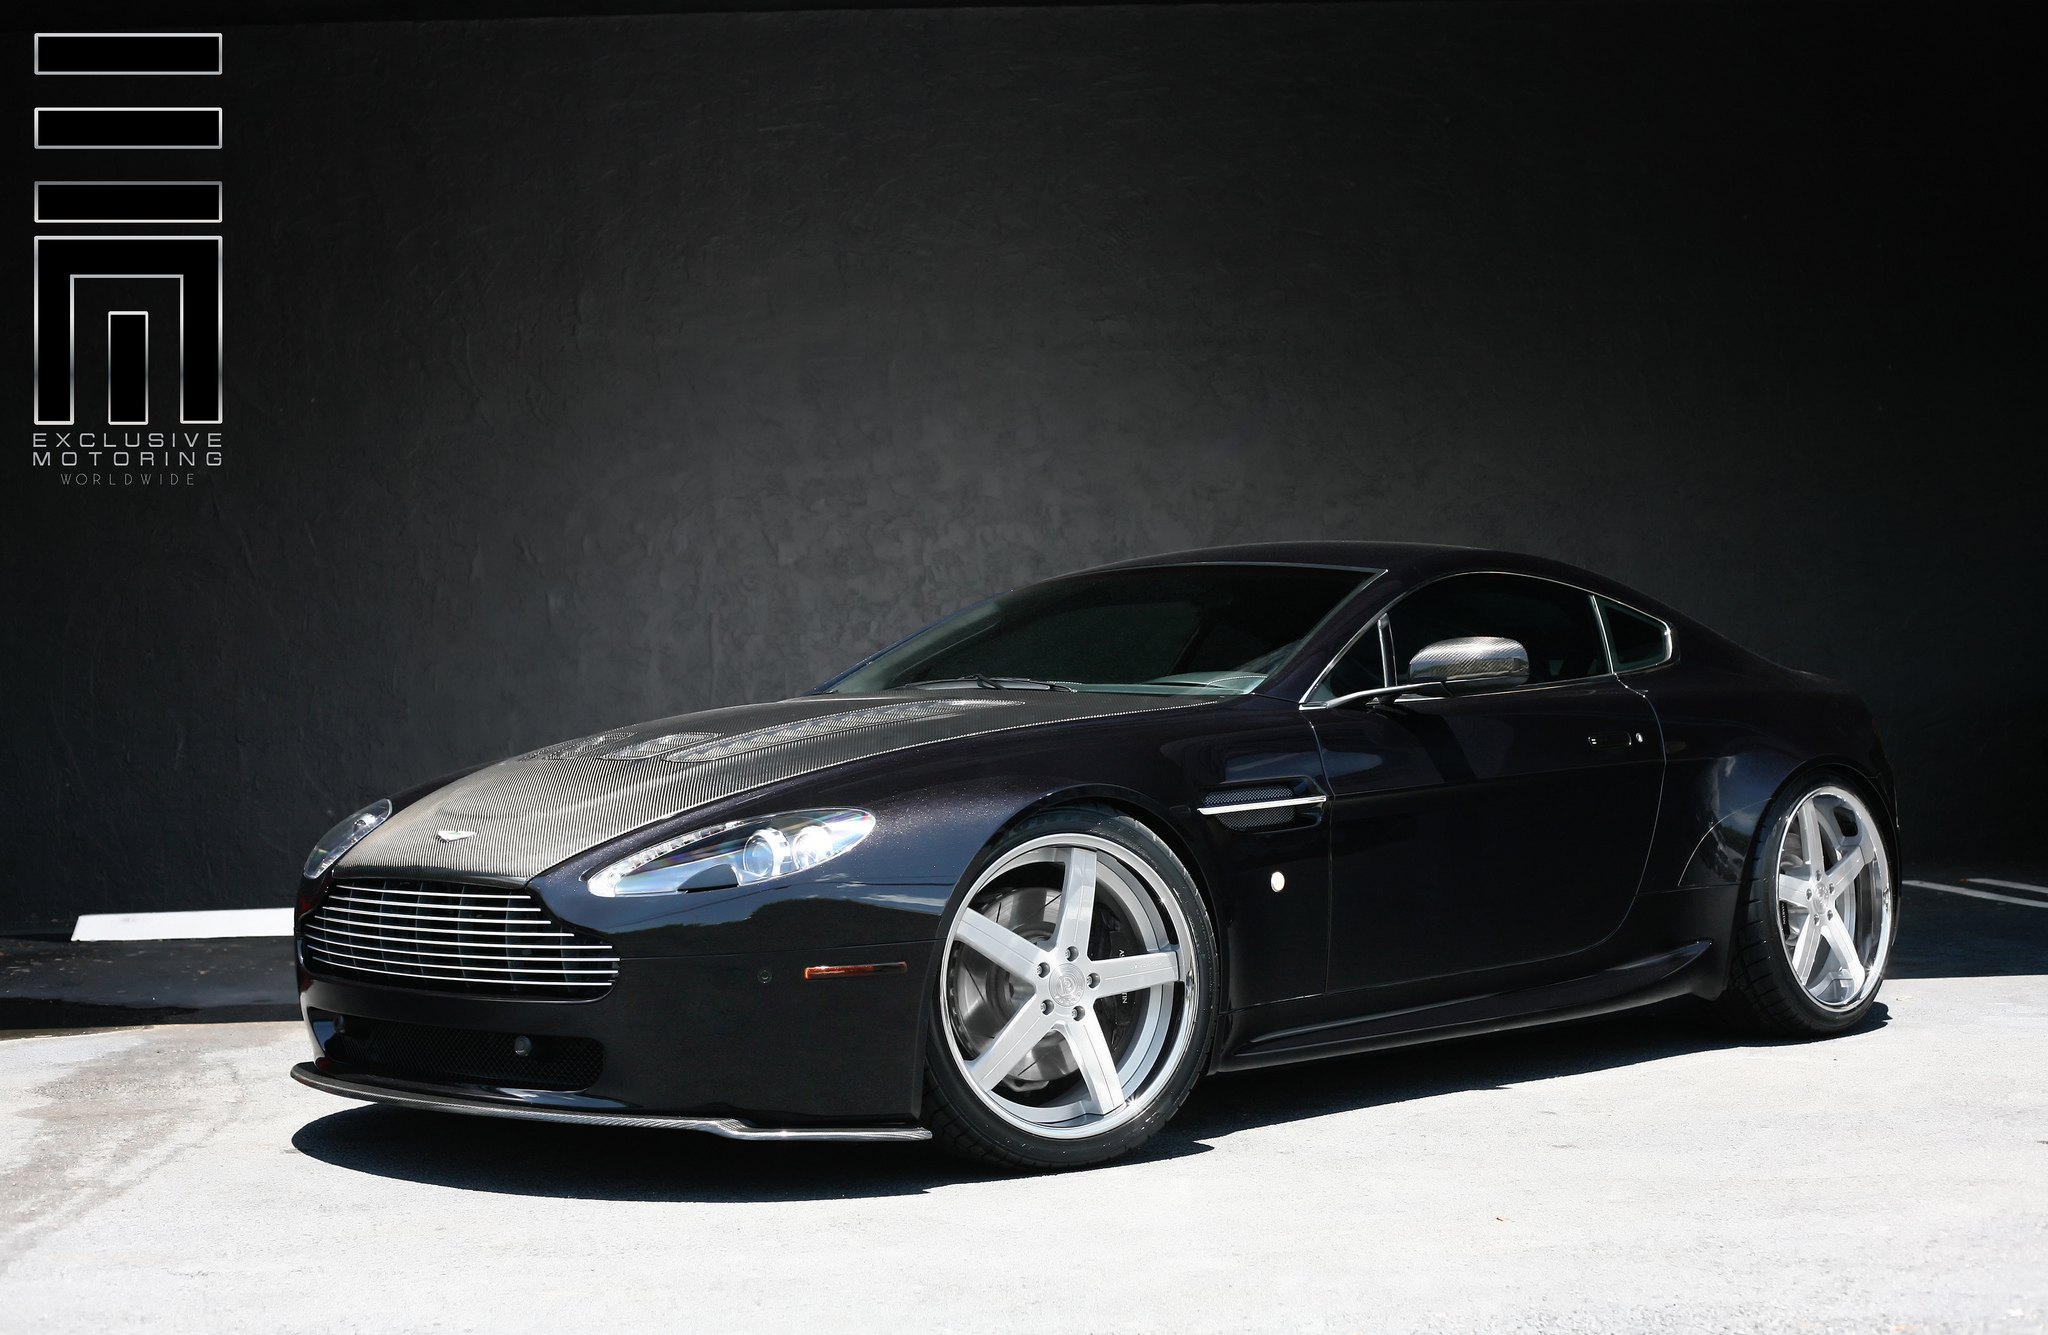 Black Aston Martin Vantage with contrasting Silver Wheels - Photo by Exclusive Motoring